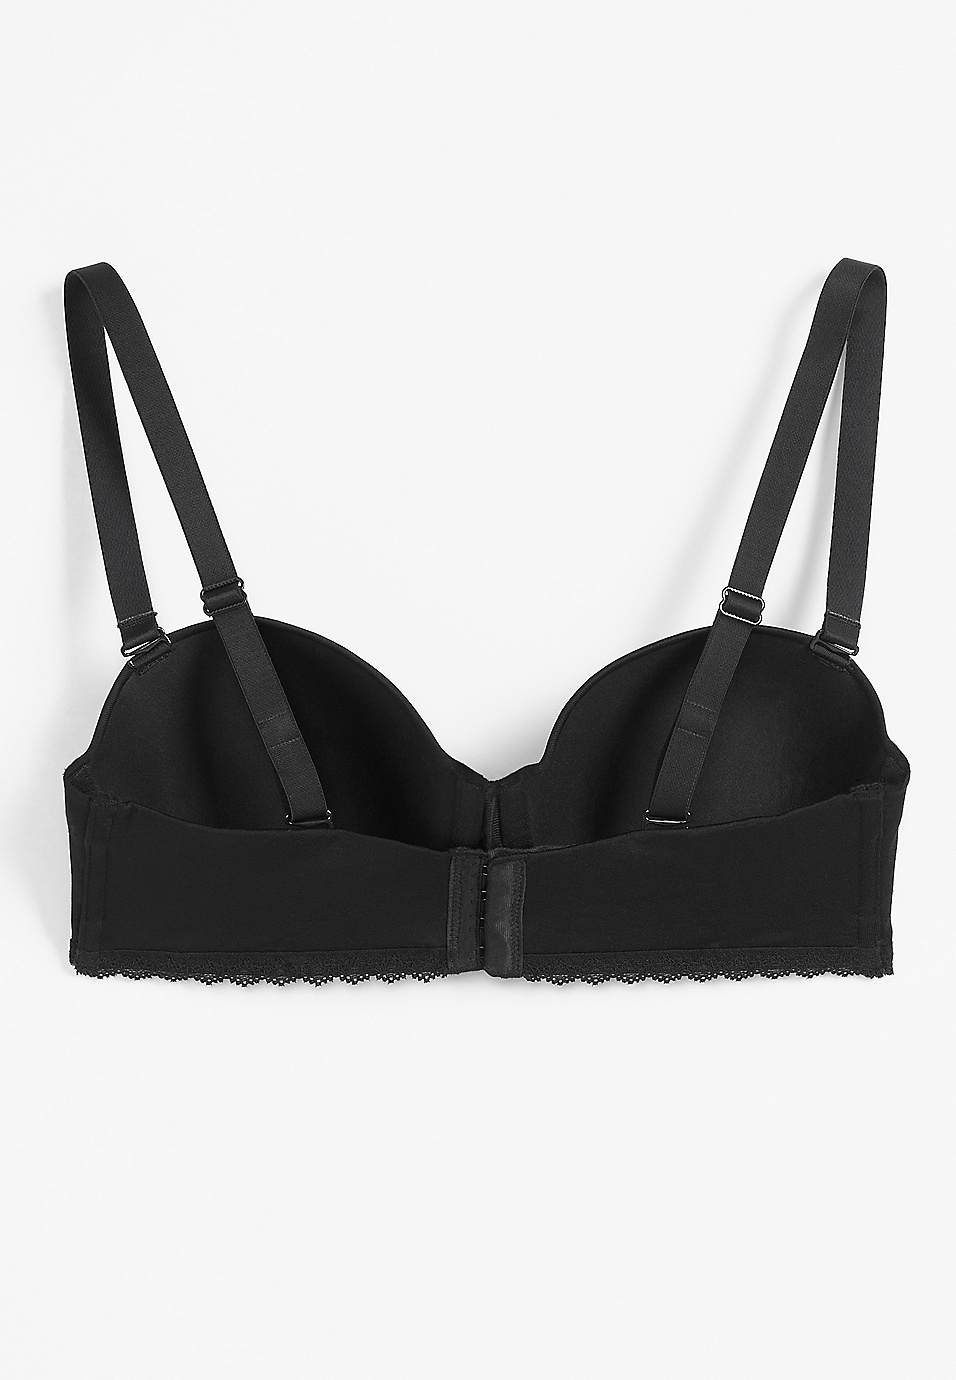 Macy's Lingerie Event: Buy 1 Bra And Get 1 for $5 + Extra 20% Off